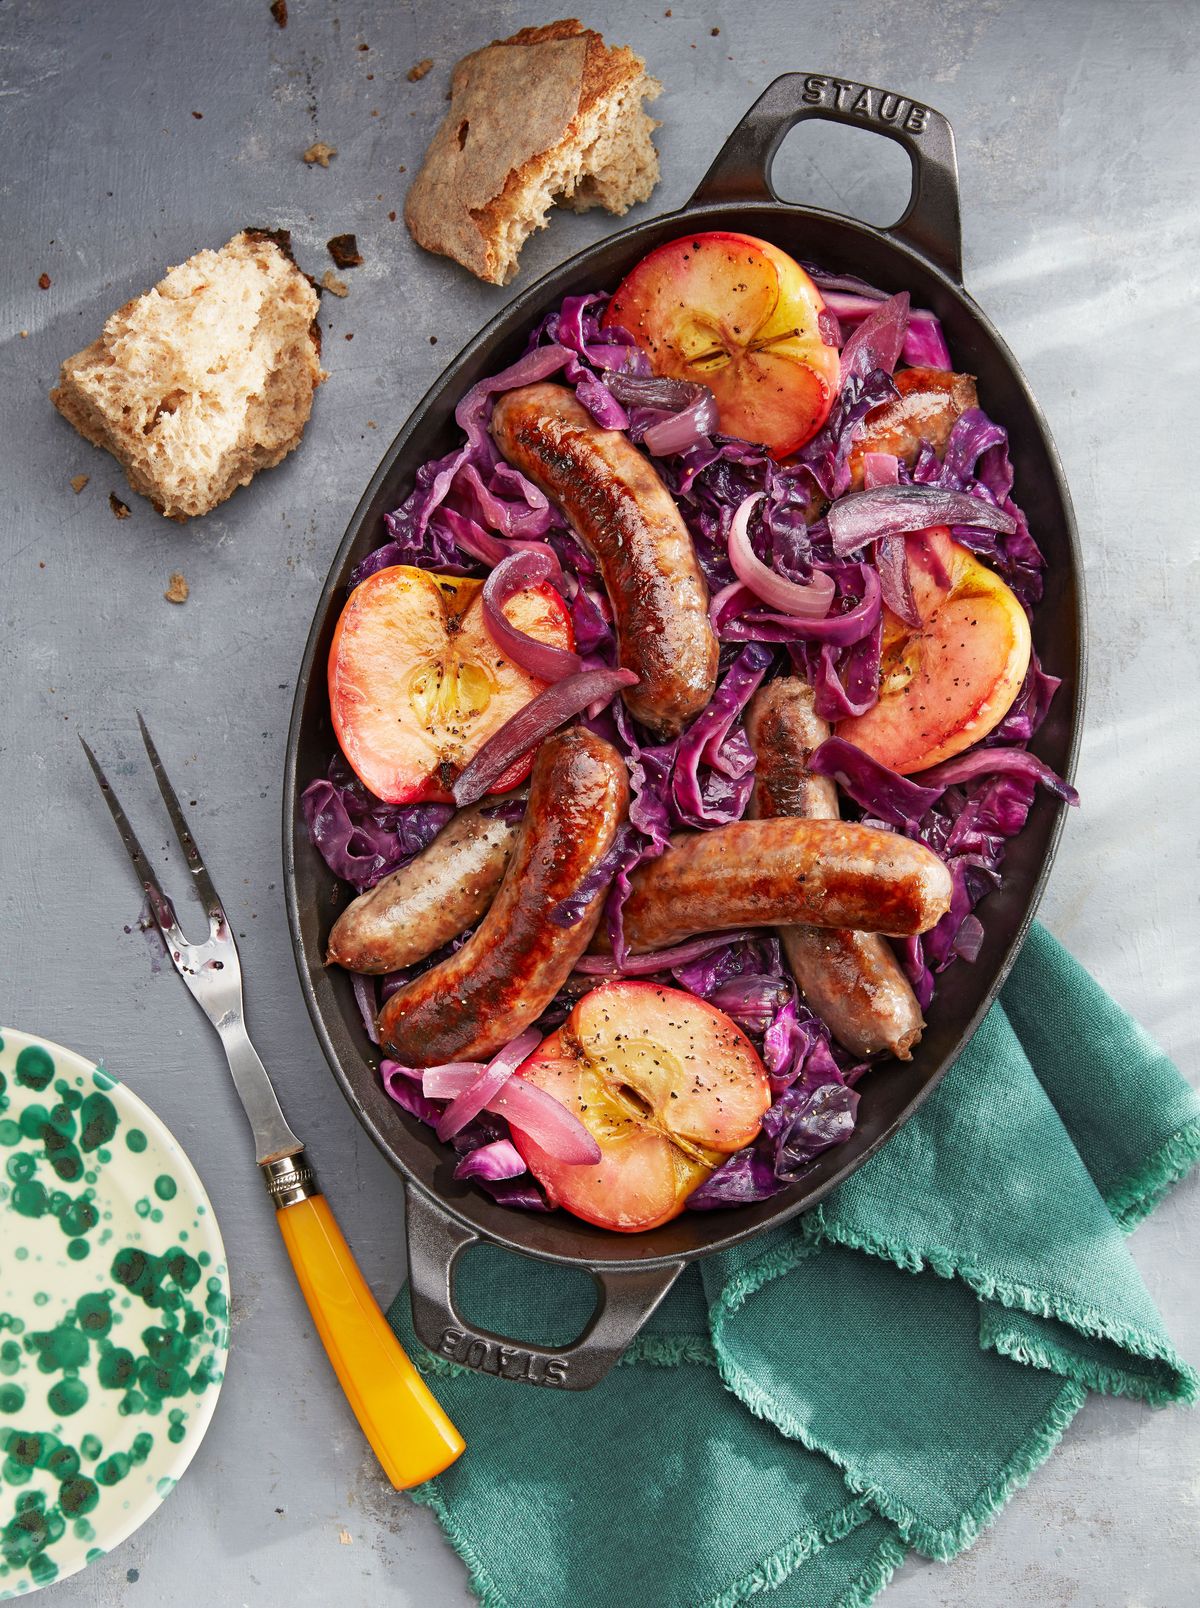 seared sausage with cabbage and pink lady apples